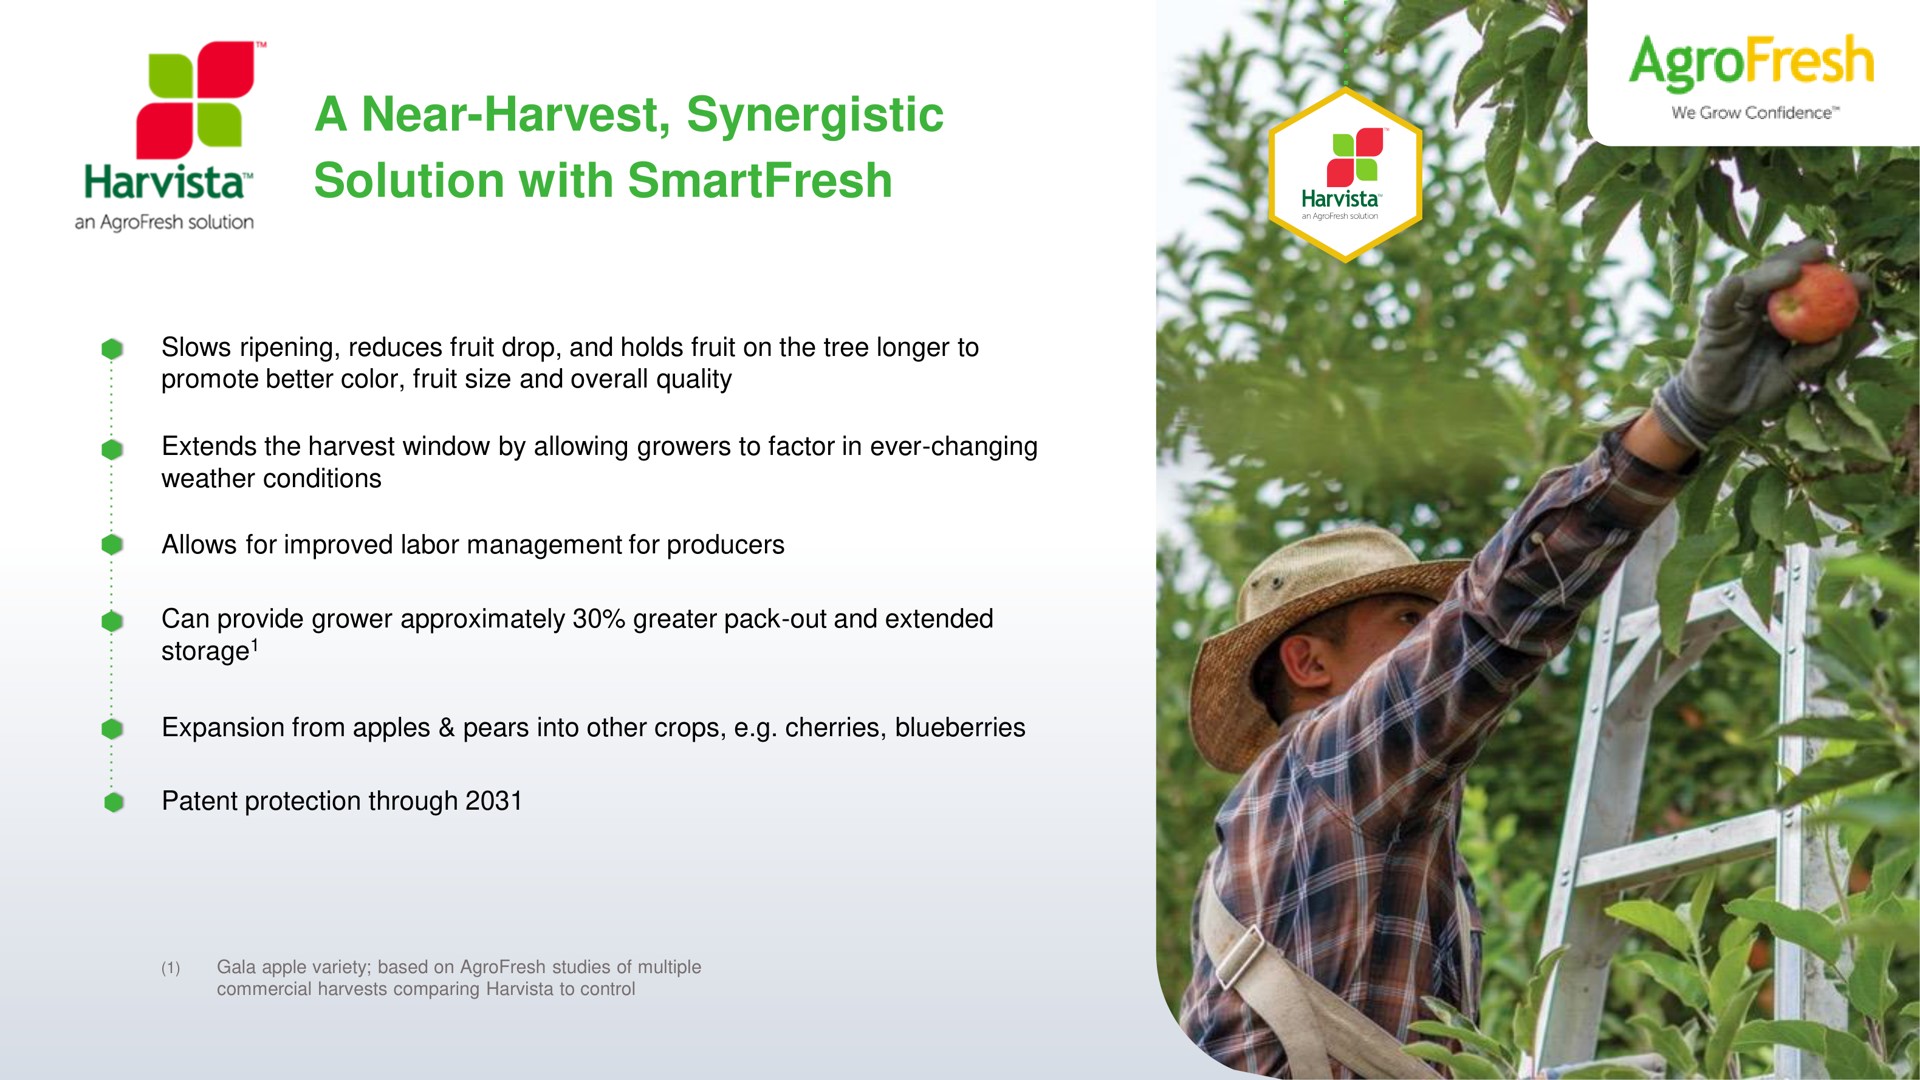 a near harvest synergistic solution with anear harvest | AgroFresh